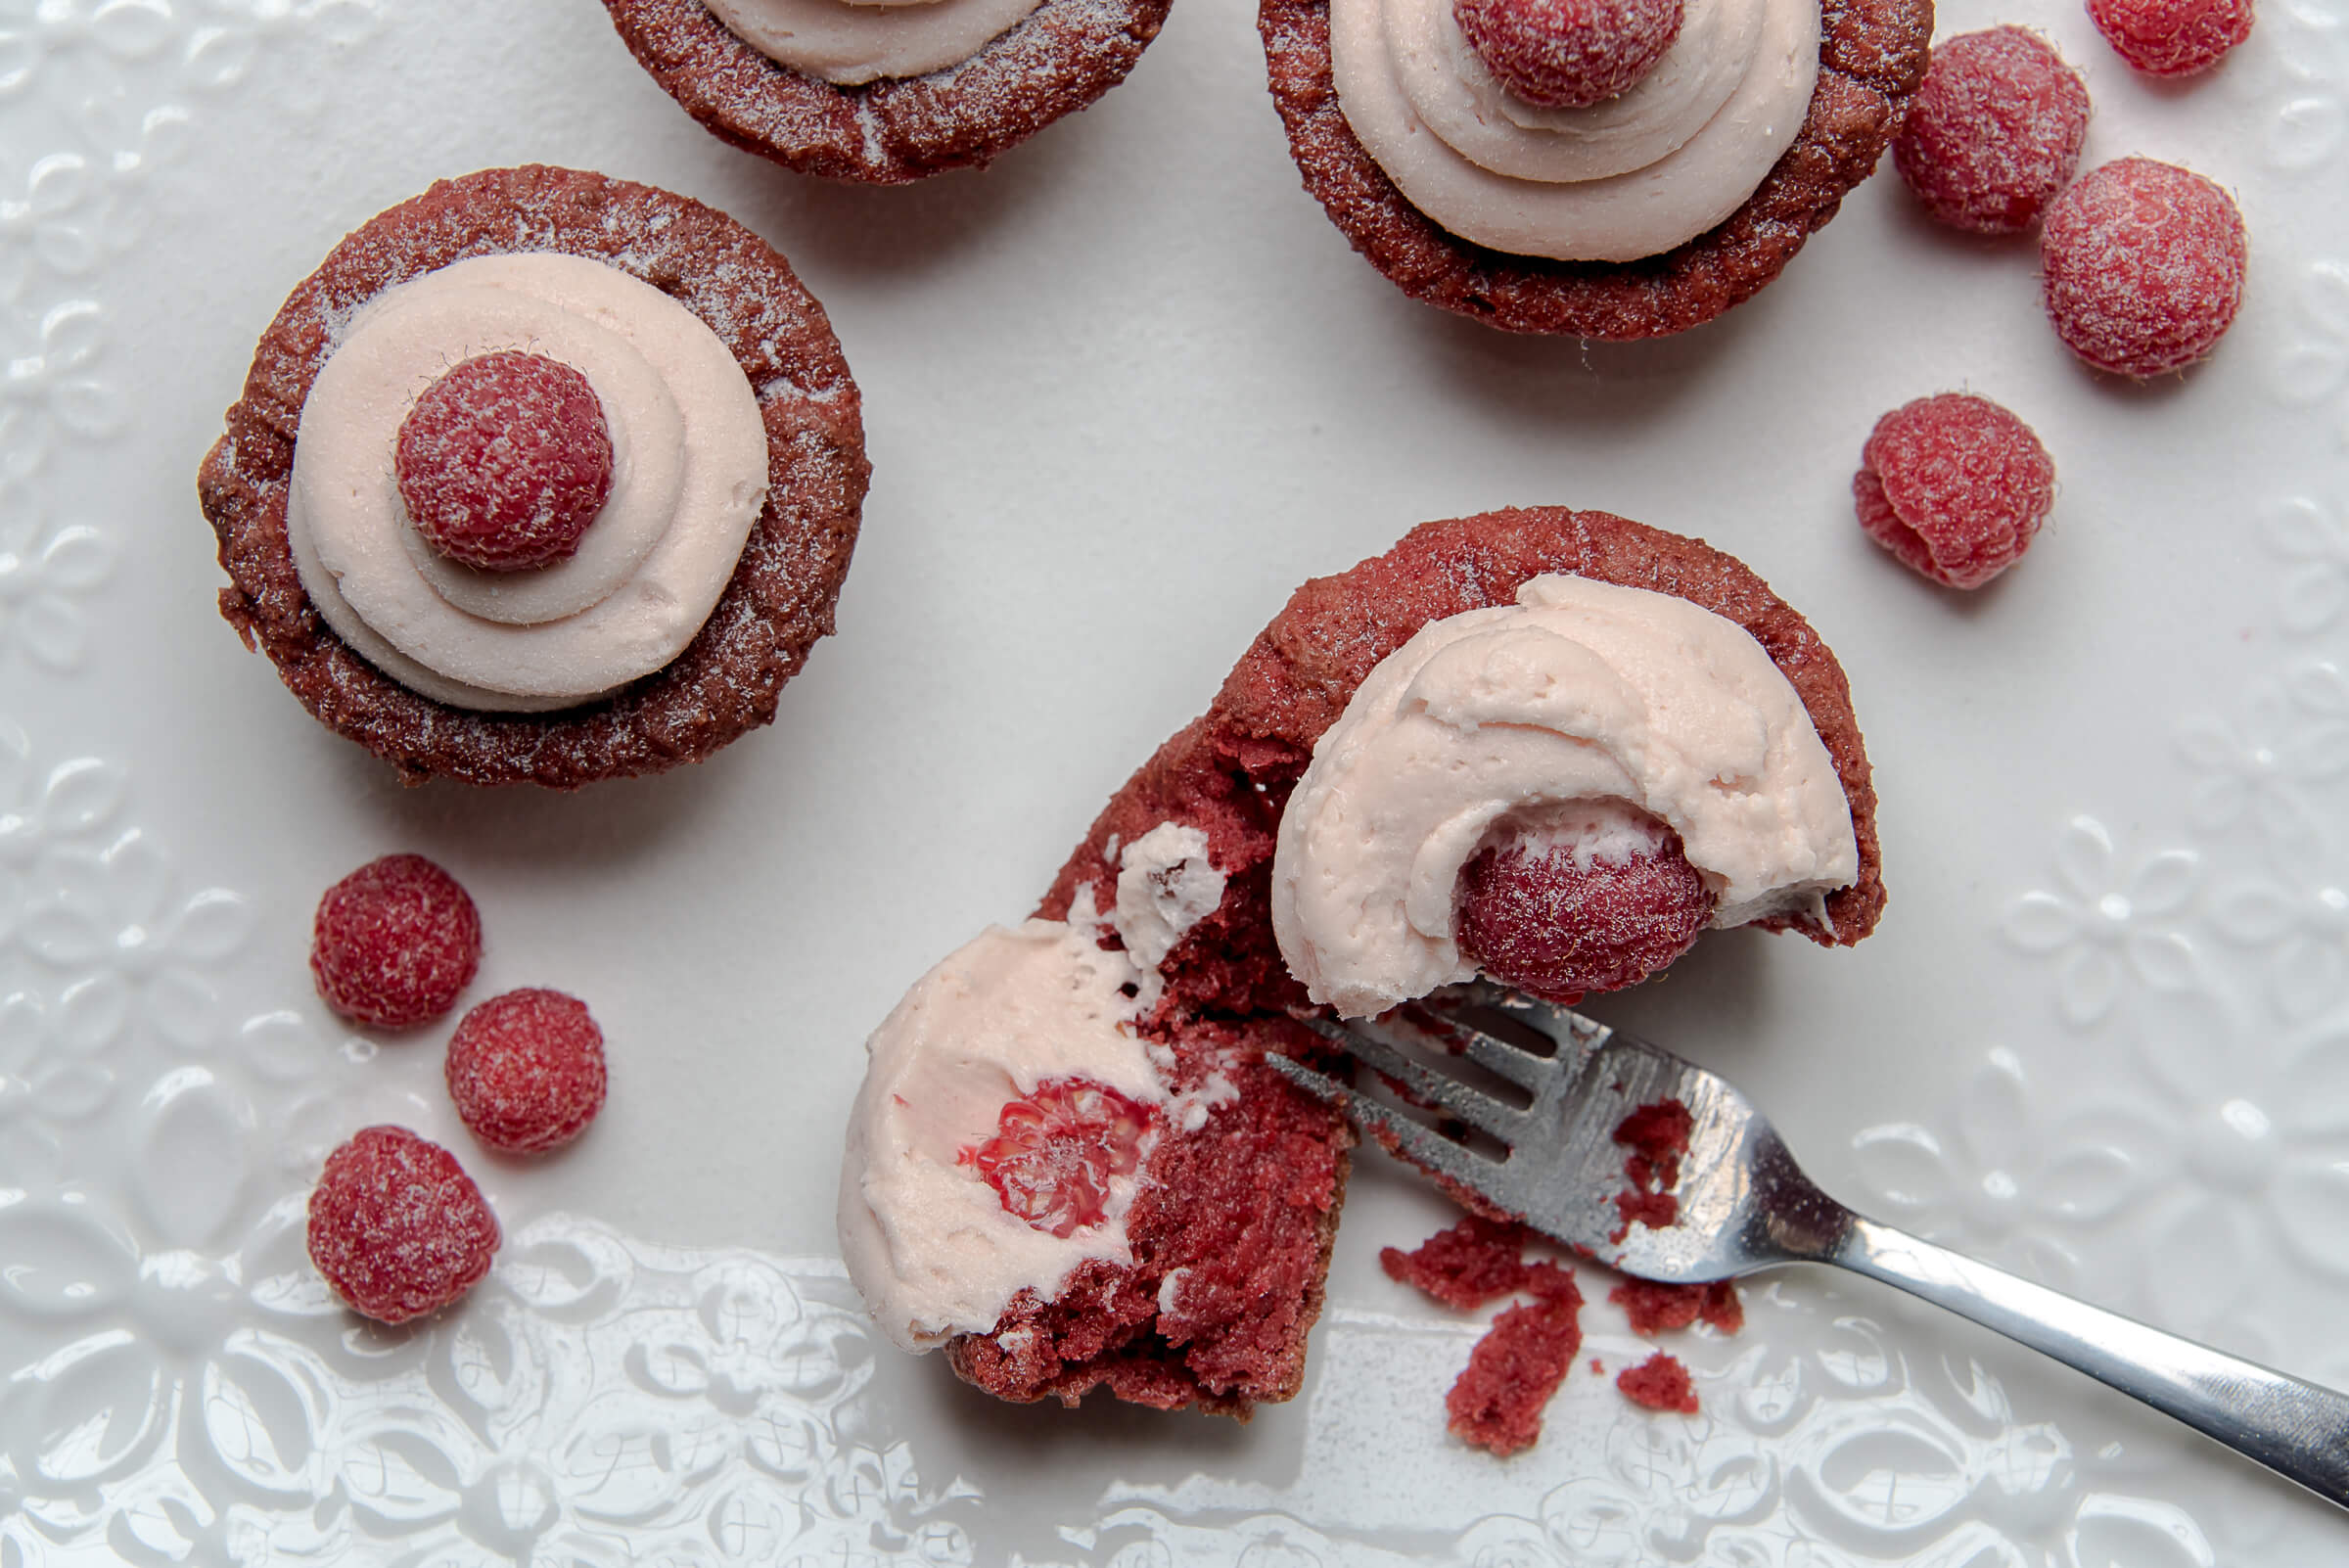 Keto Chow Raspberry Cheesecake Red Velvet Cupcakes with Cream Cheese Frosting